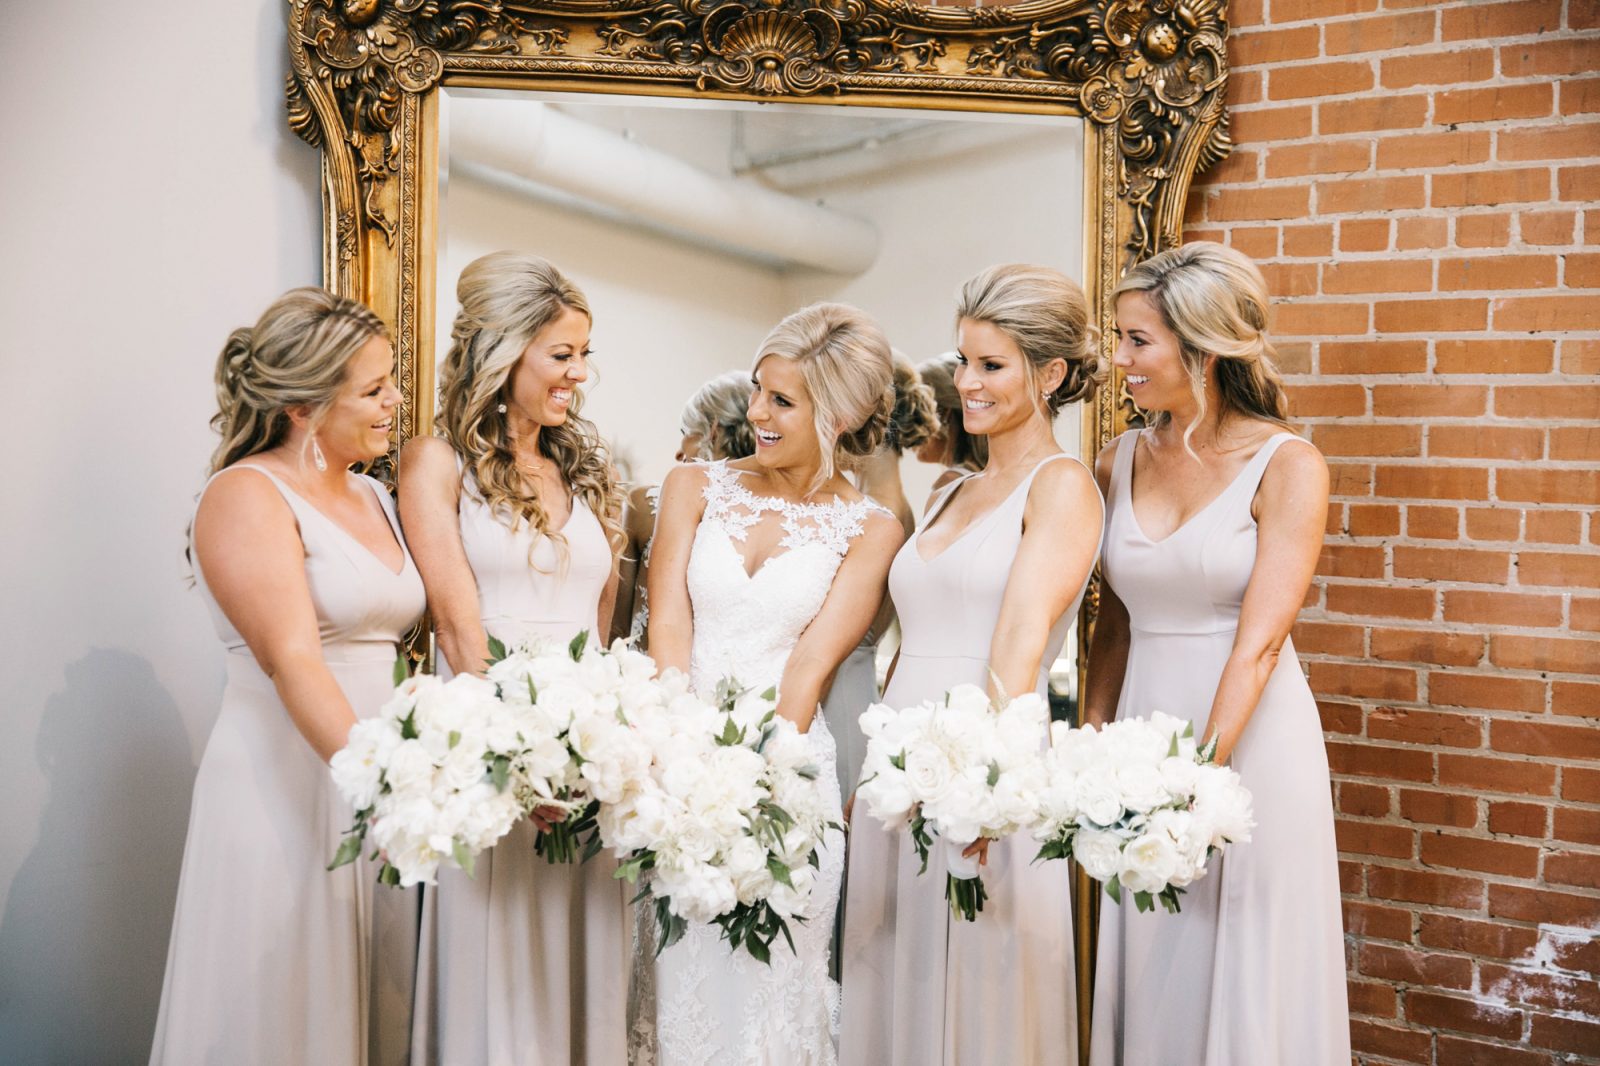 Bride and her bridesmaids enjoying their stress free morning before the ceremony at Monroe Pearson venue